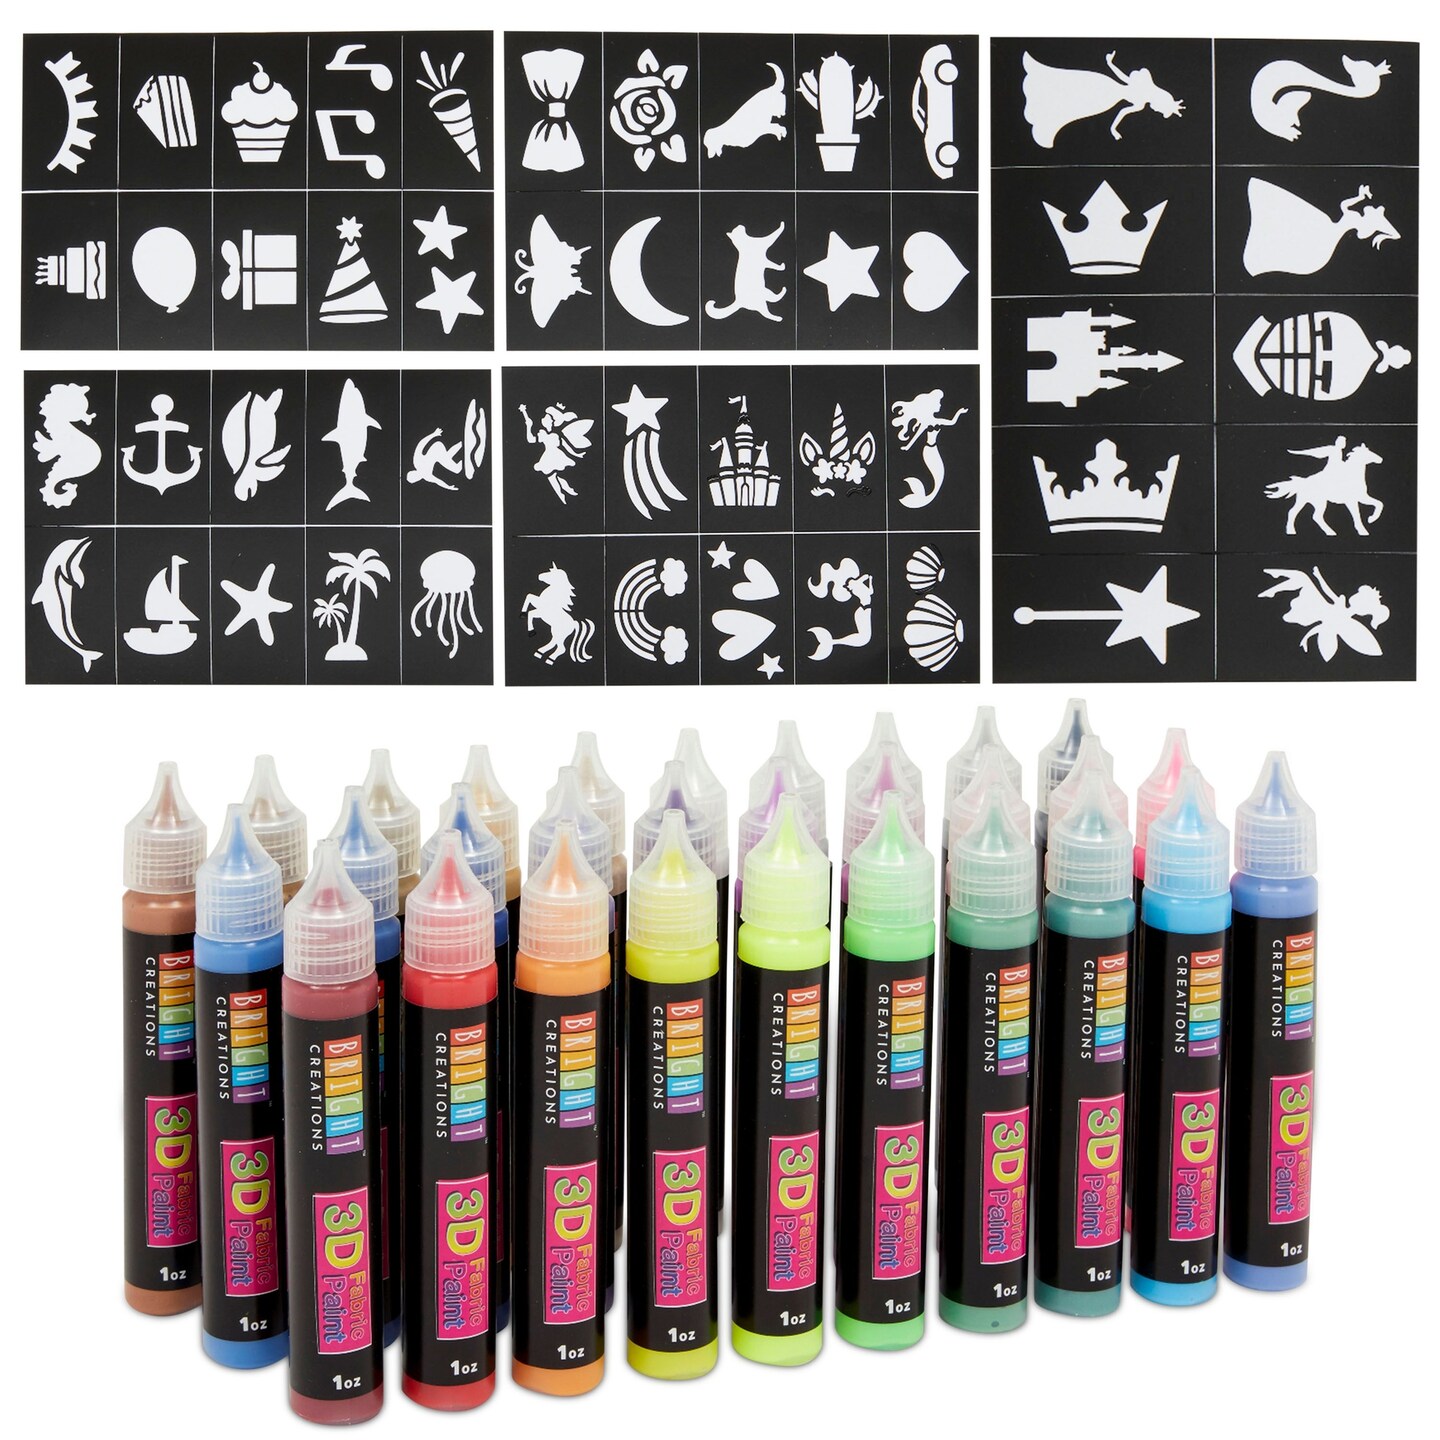 12 Pack: Soft Touch Fabric Paint by Make Market®